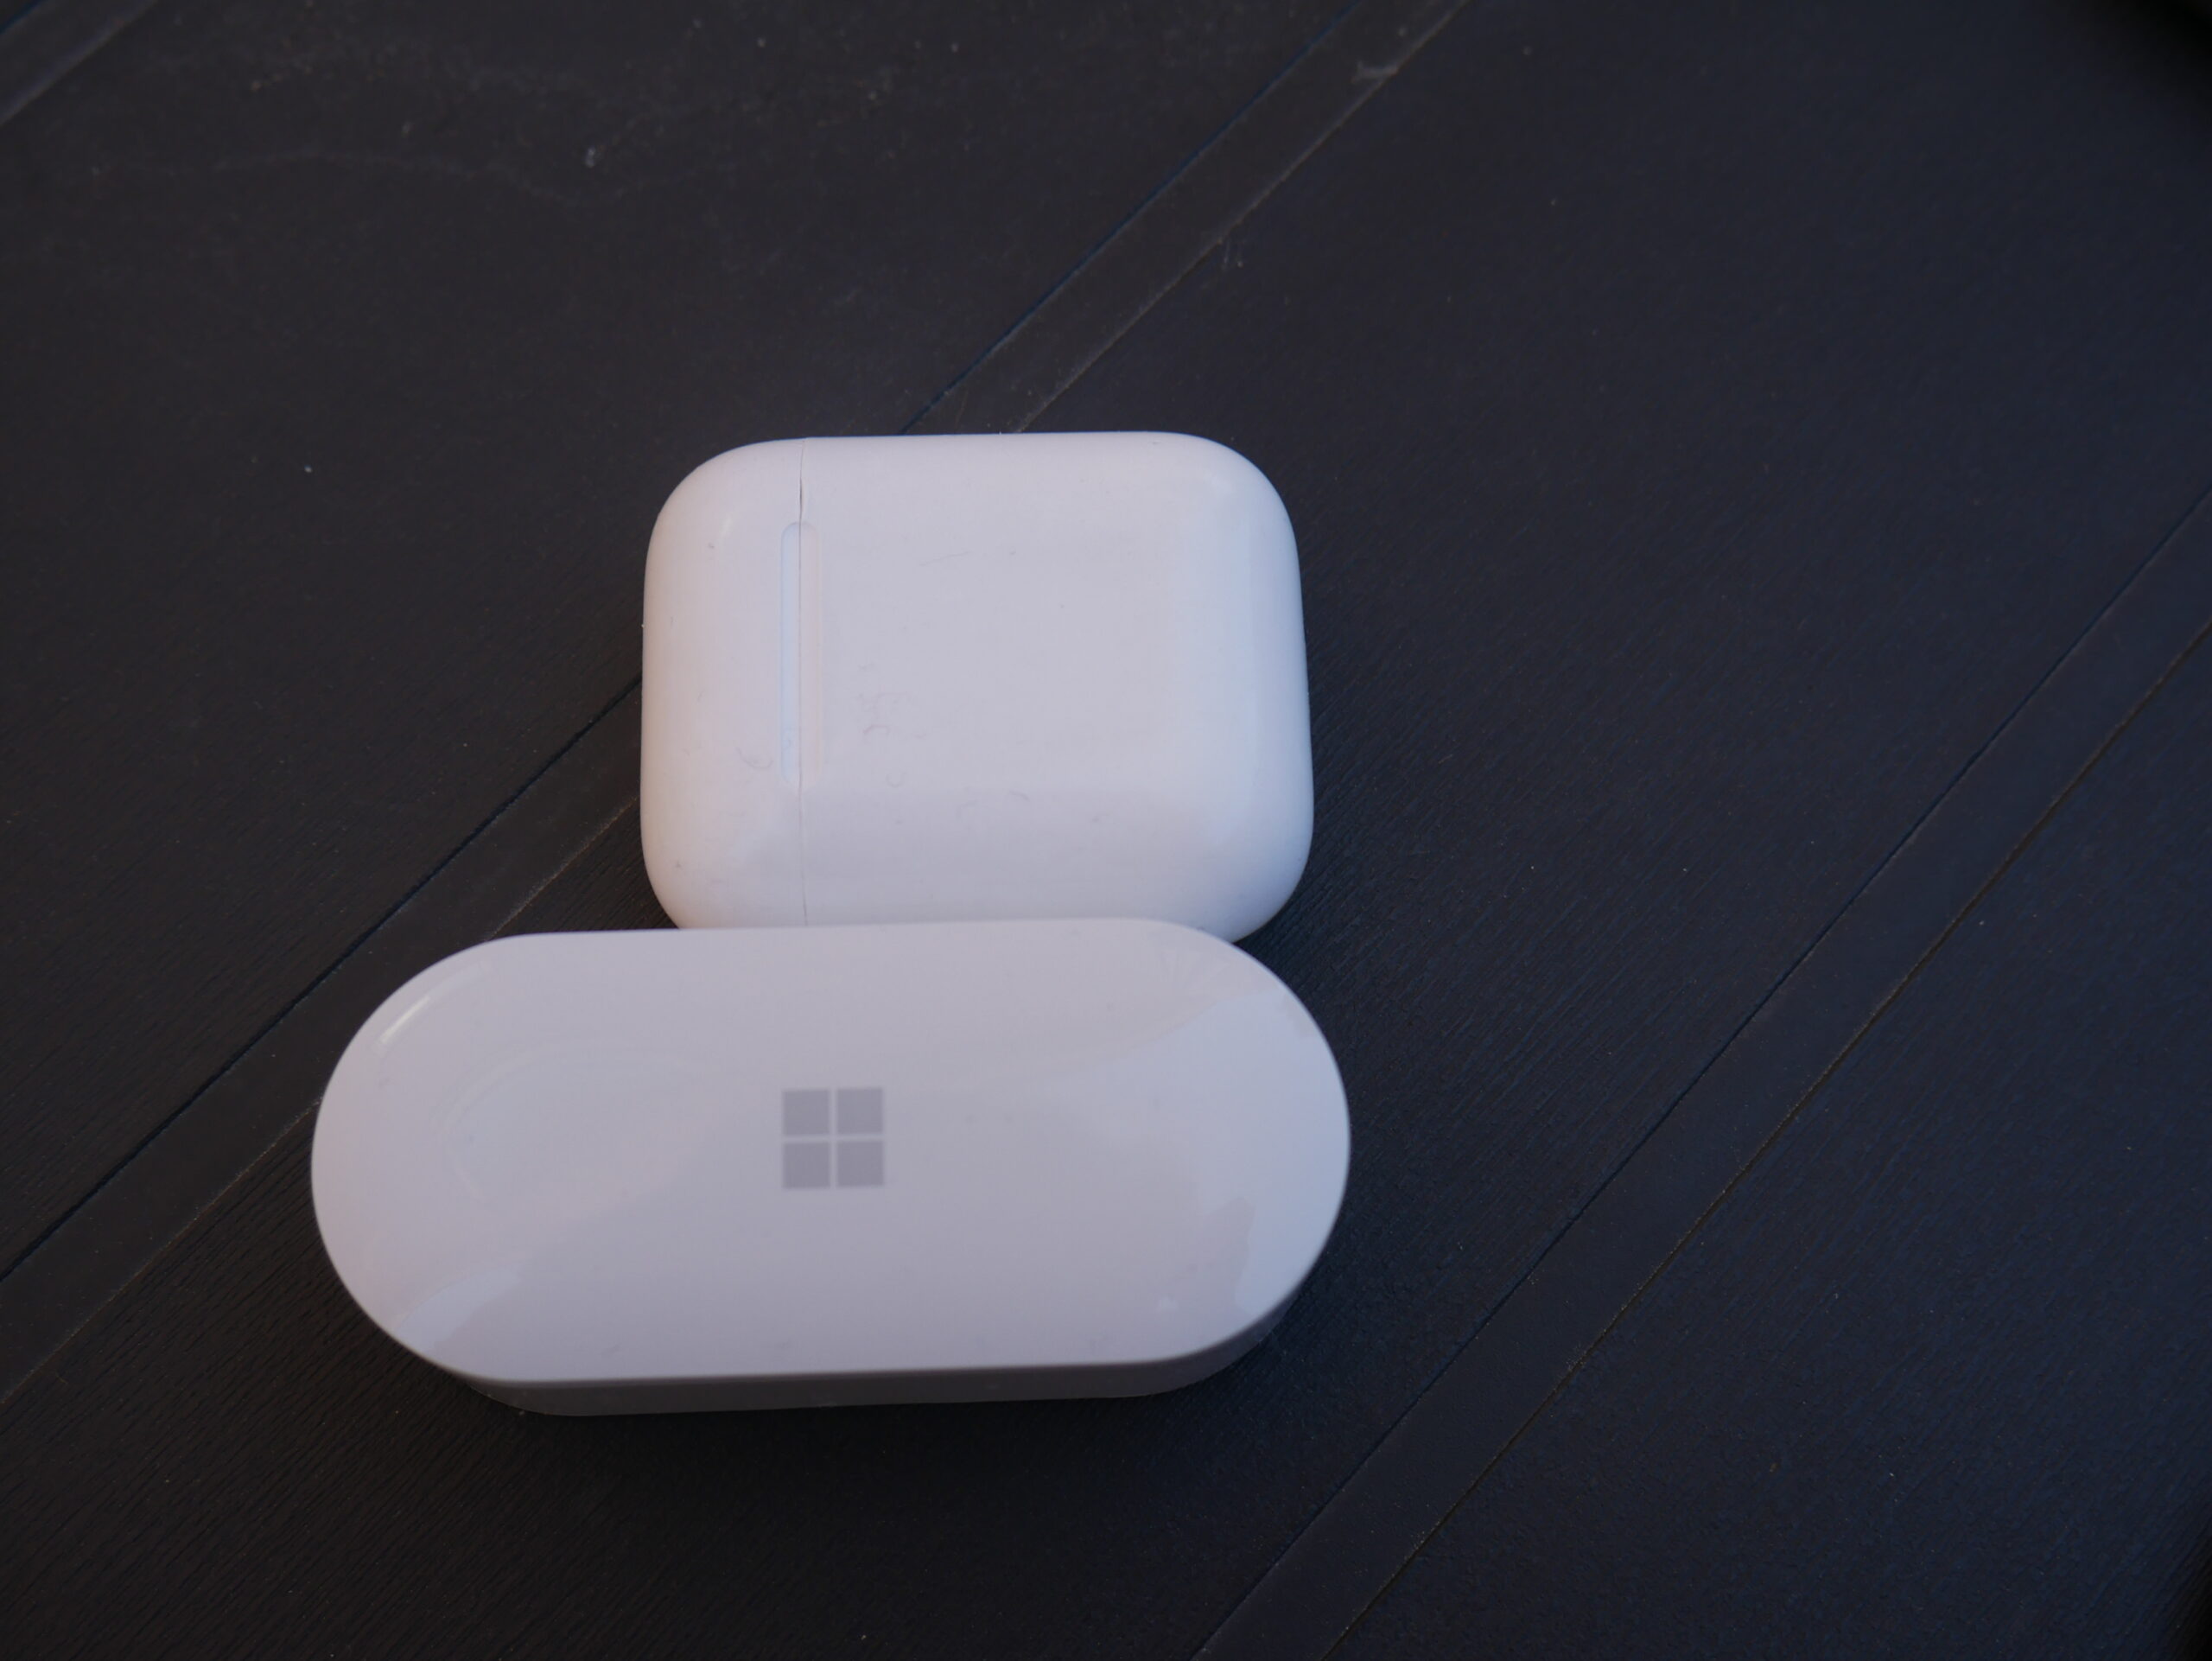 Surface Earbuds y Airpods Caja 2